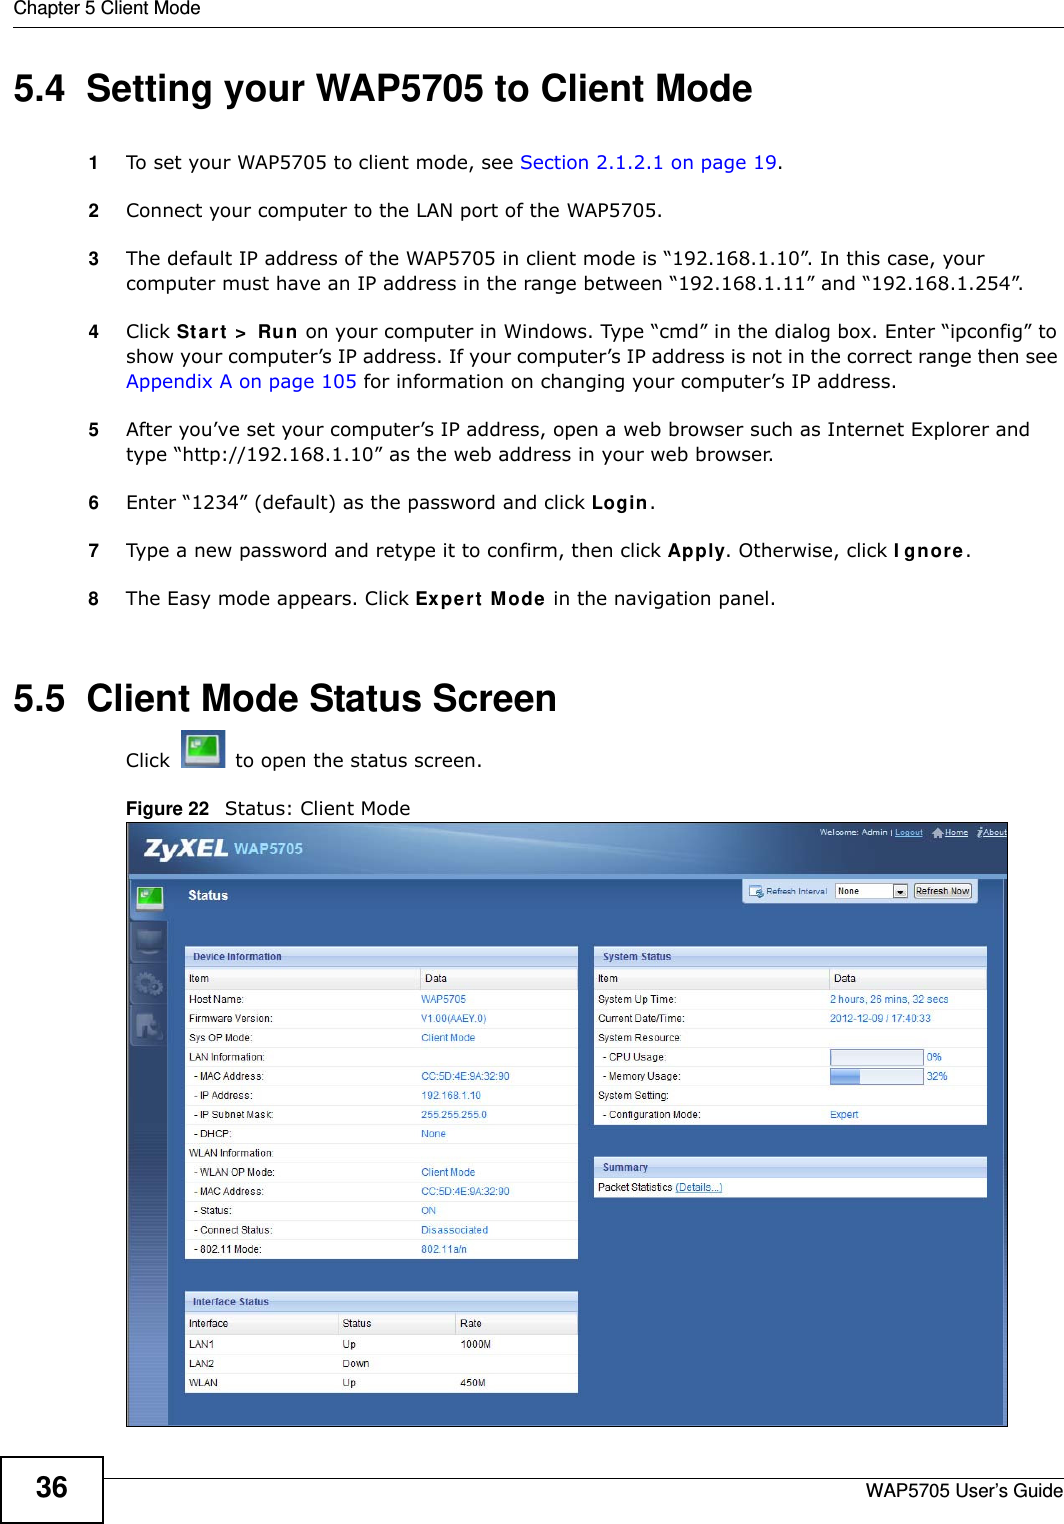 Chapter 5 Client ModeWAP5705 User’s Guide365.4  Setting your WAP5705 to Client Mode1To set your WAP5705 to client mode, see Section 2.1.2.1 on page 19.2Connect your computer to the LAN port of the WAP5705. 3The default IP address of the WAP5705 in client mode is “192.168.1.10”. In this case, your computer must have an IP address in the range between “192.168.1.11” and “192.168.1.254”.4Click St a r t  &gt;  Run  on your computer in Windows. Type “cmd” in the dialog box. Enter “ipconfig” to show your computer’s IP address. If your computer’s IP address is not in the correct range then see Appendix A on page 105 for information on changing your computer’s IP address.5After you’ve set your computer’s IP address, open a web browser such as Internet Explorer and type “http://192.168.1.10” as the web address in your web browser.6Enter “1234” (default) as the password and click Login.7Type a new password and retype it to confirm, then click Apply. Otherwise, click I gn ore.8The Easy mode appears. Click Expert  Mode in the navigation panel.5.5  Client Mode Status ScreenClick   to open the status screen. Figure 22   Status: Client Mode 